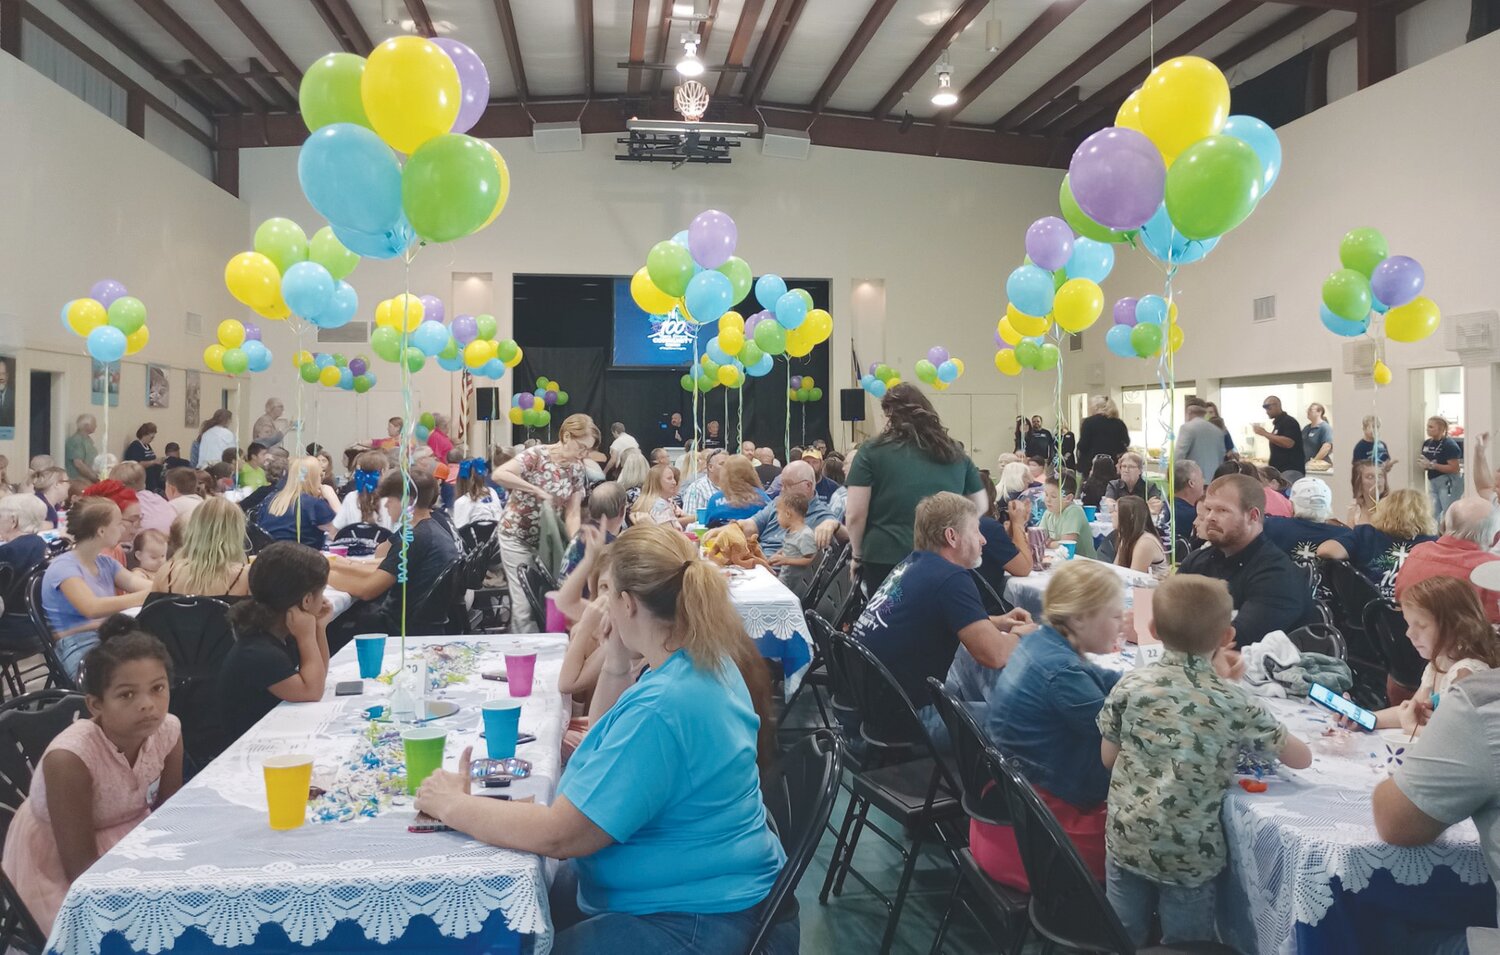 Residents filled the refectory and sanctuary for the Community Church of Keystone Heights’s Centennial Celebration.